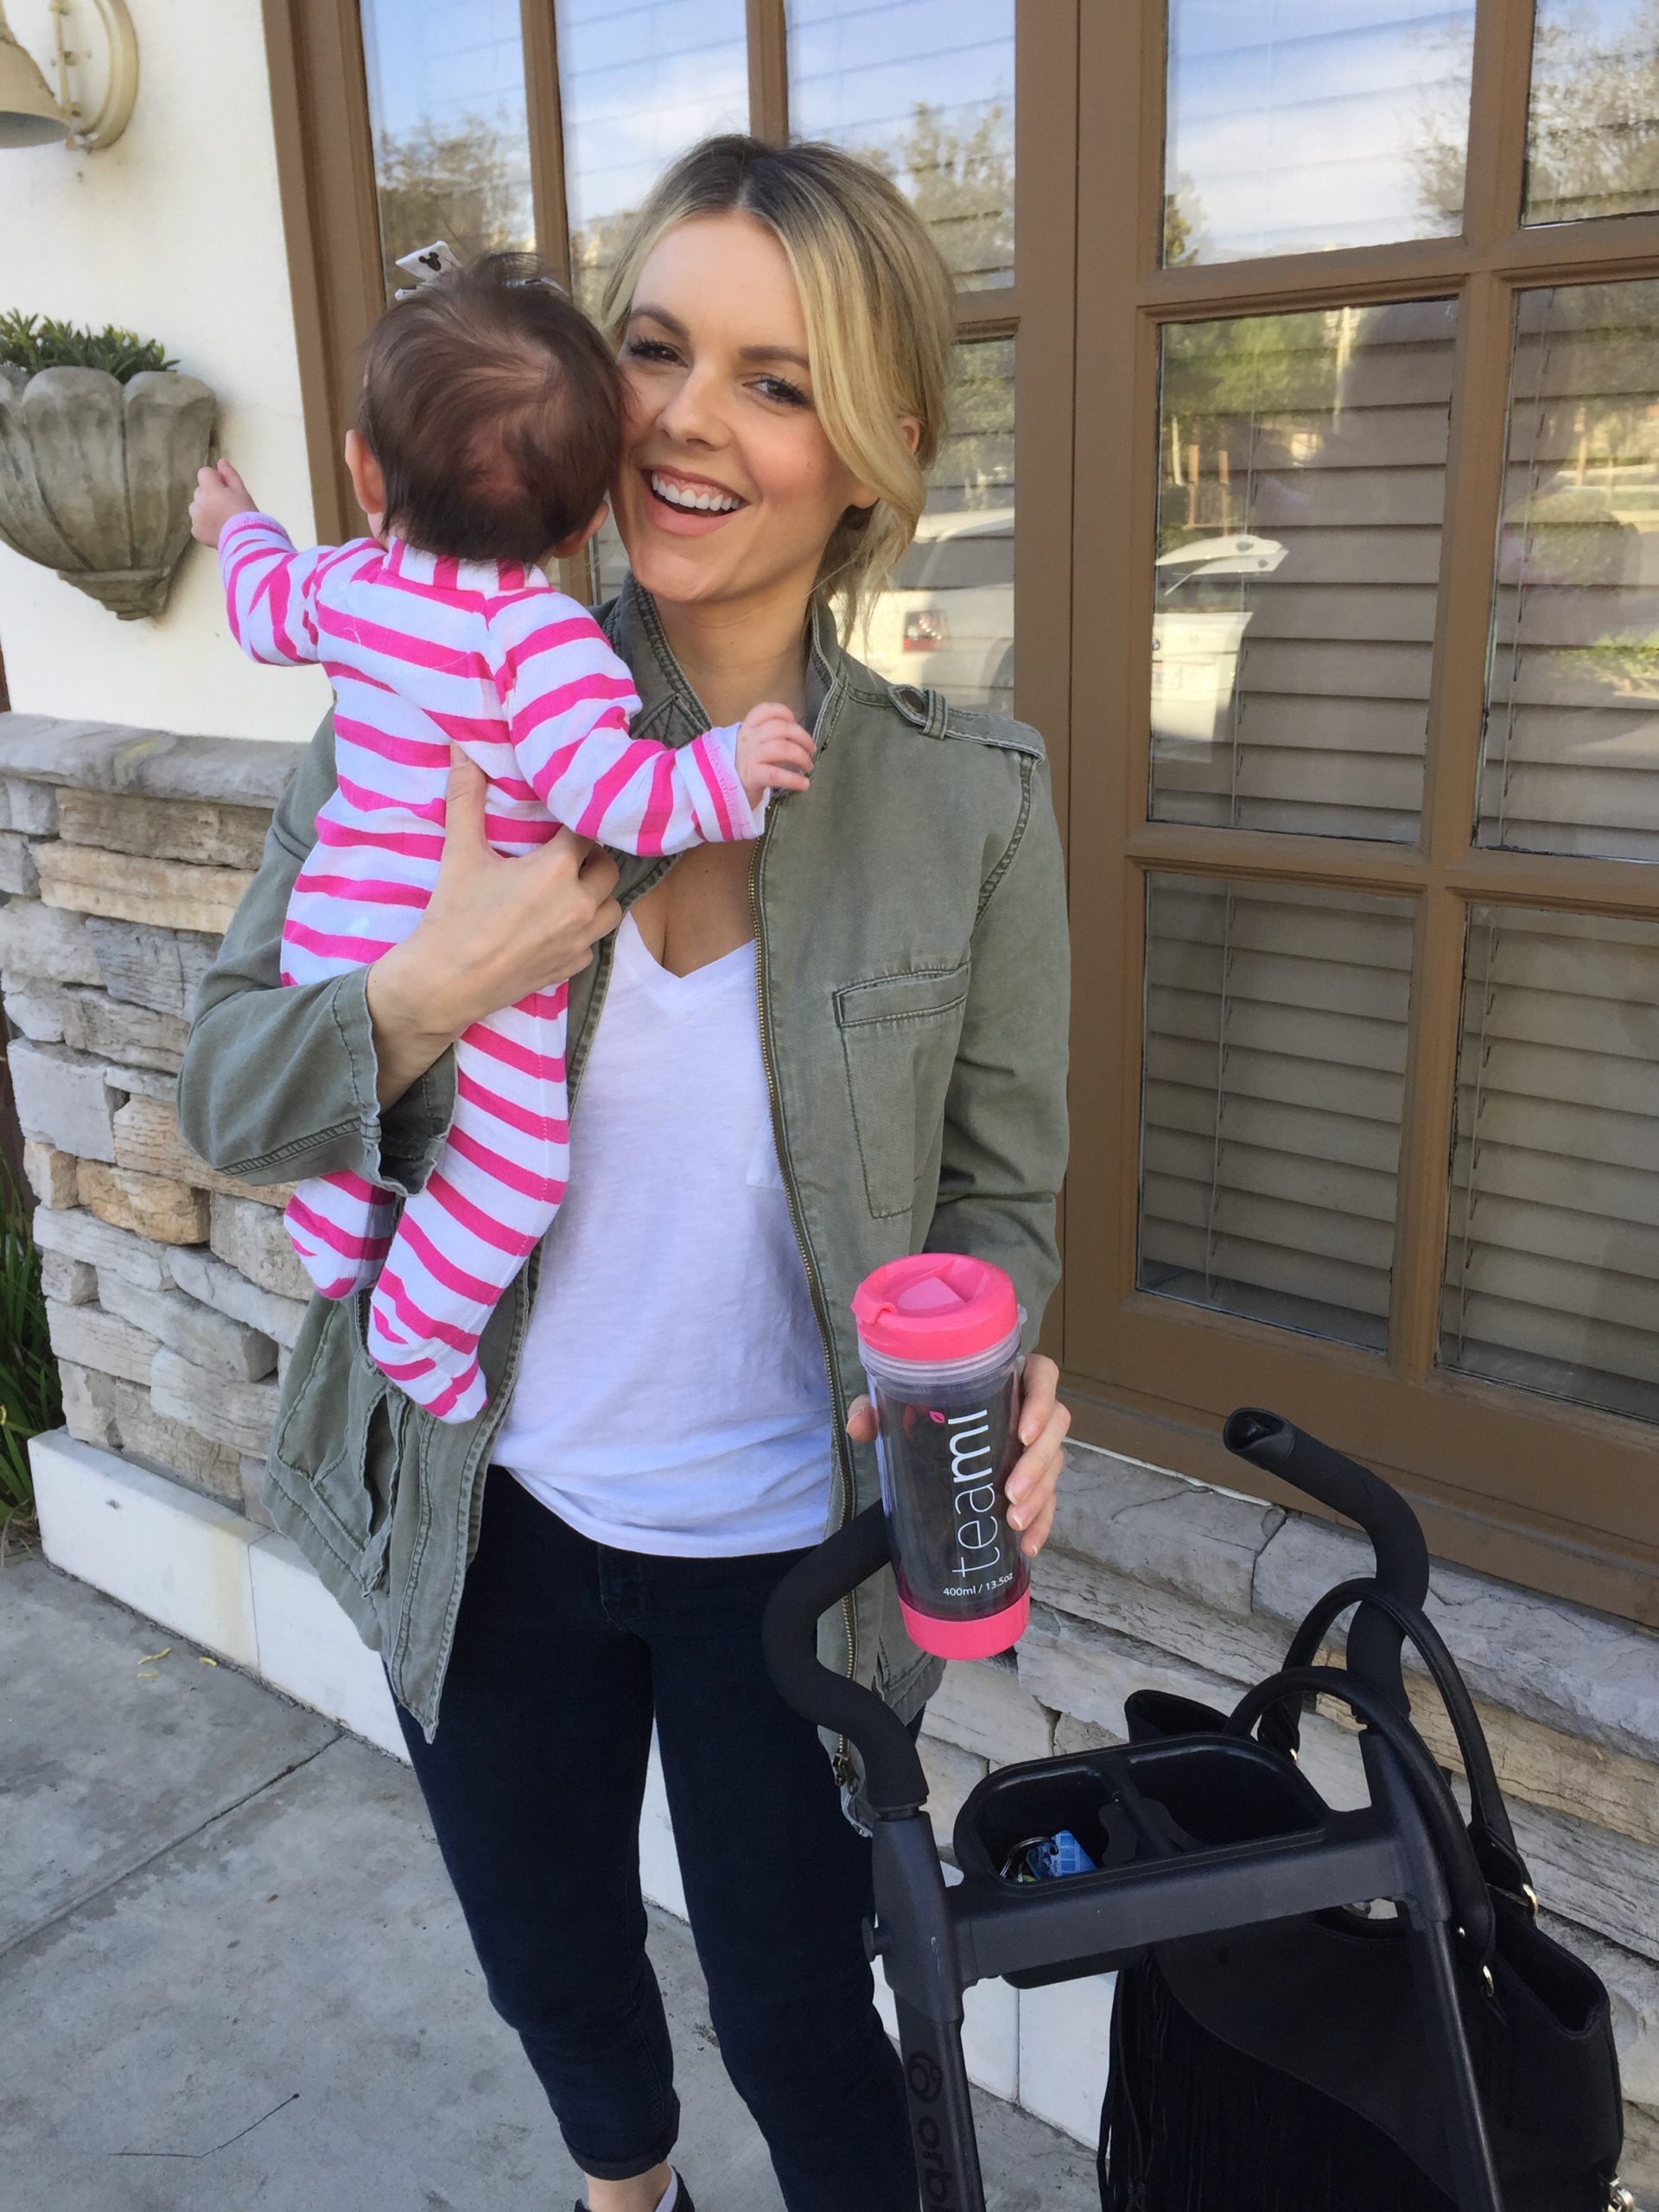 Ali Fedotowsky-Manno - Today I found myself thinking a lot about how I  treat my body. The things I eat, the things I drink, how often I exercise,  and mostly about how